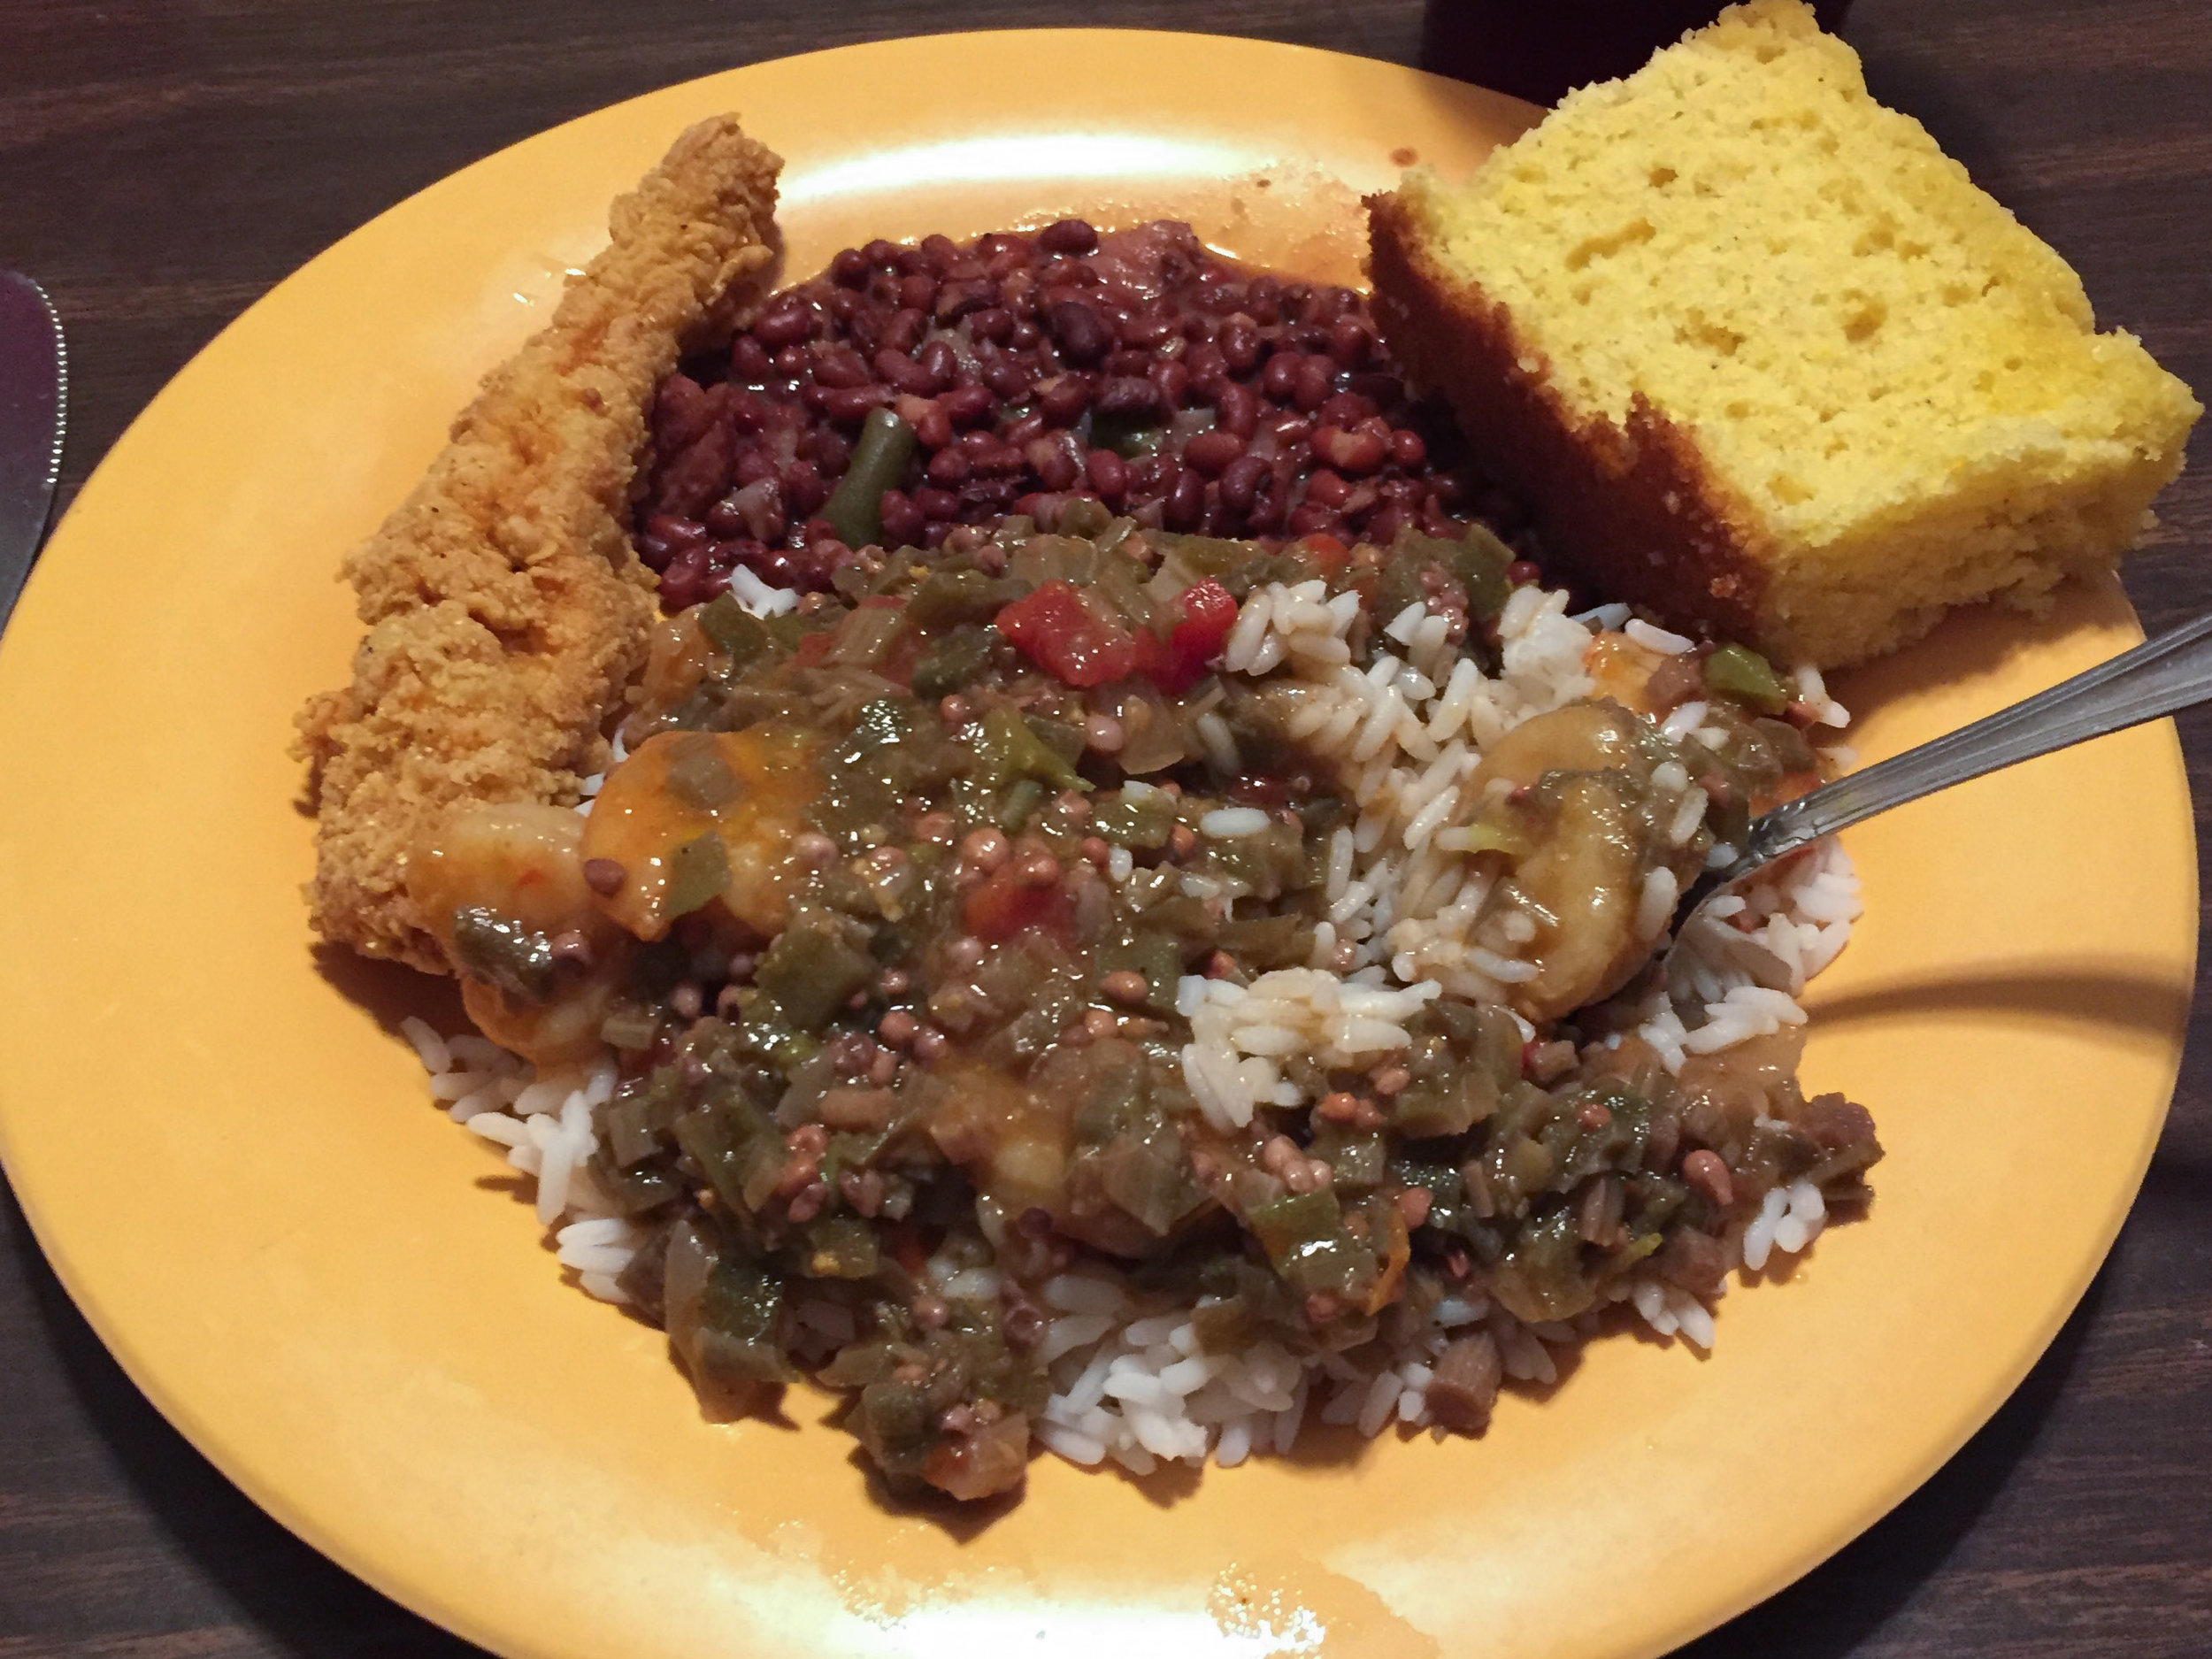  Okra-smothered shrimp, red beans, a side order of fried catfish, and a Southern 'biscuit'. 